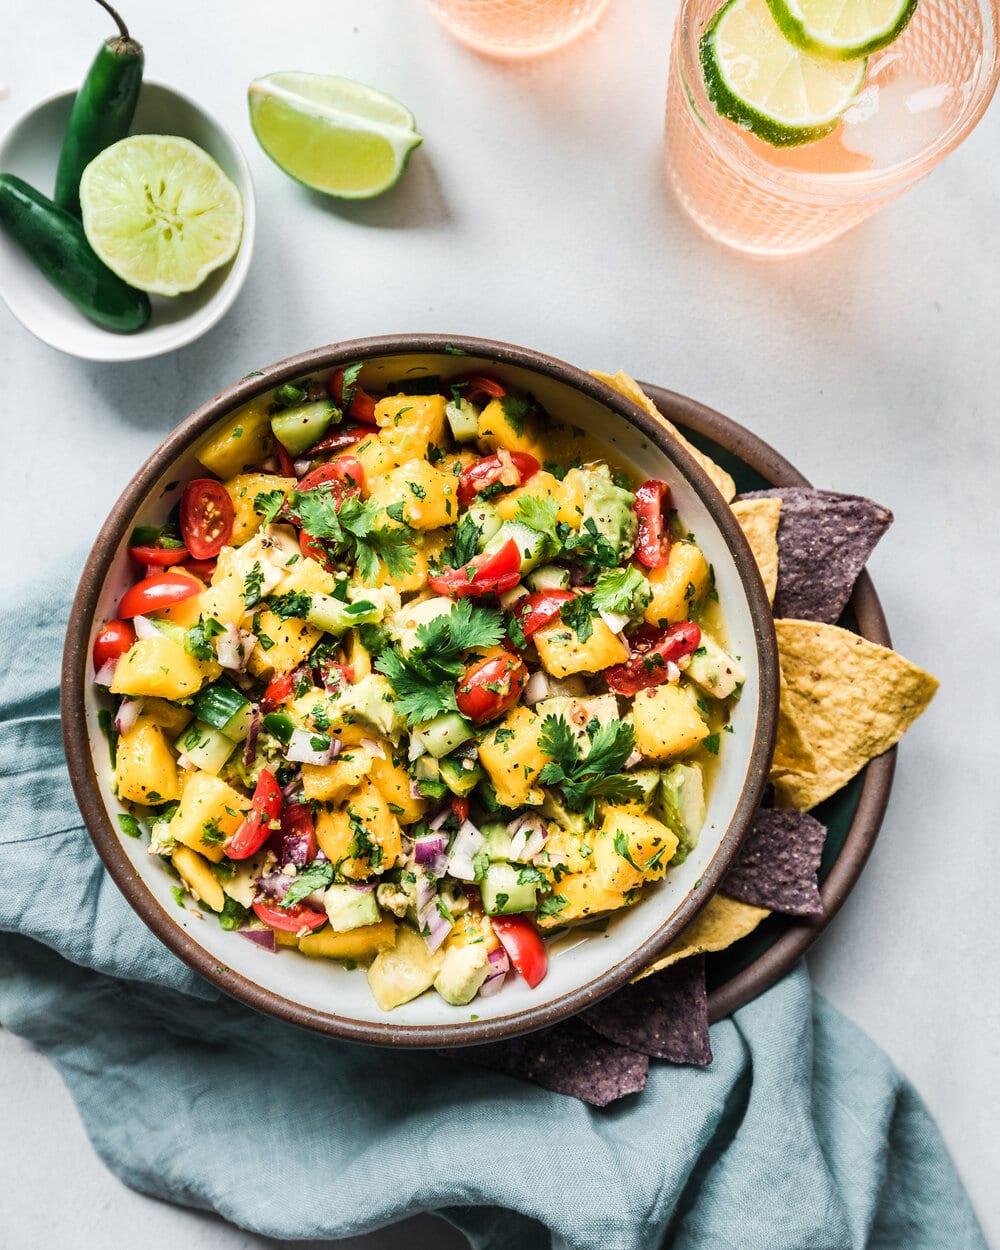 mango and avocado salsa in a bowl with tortilla chips and limes